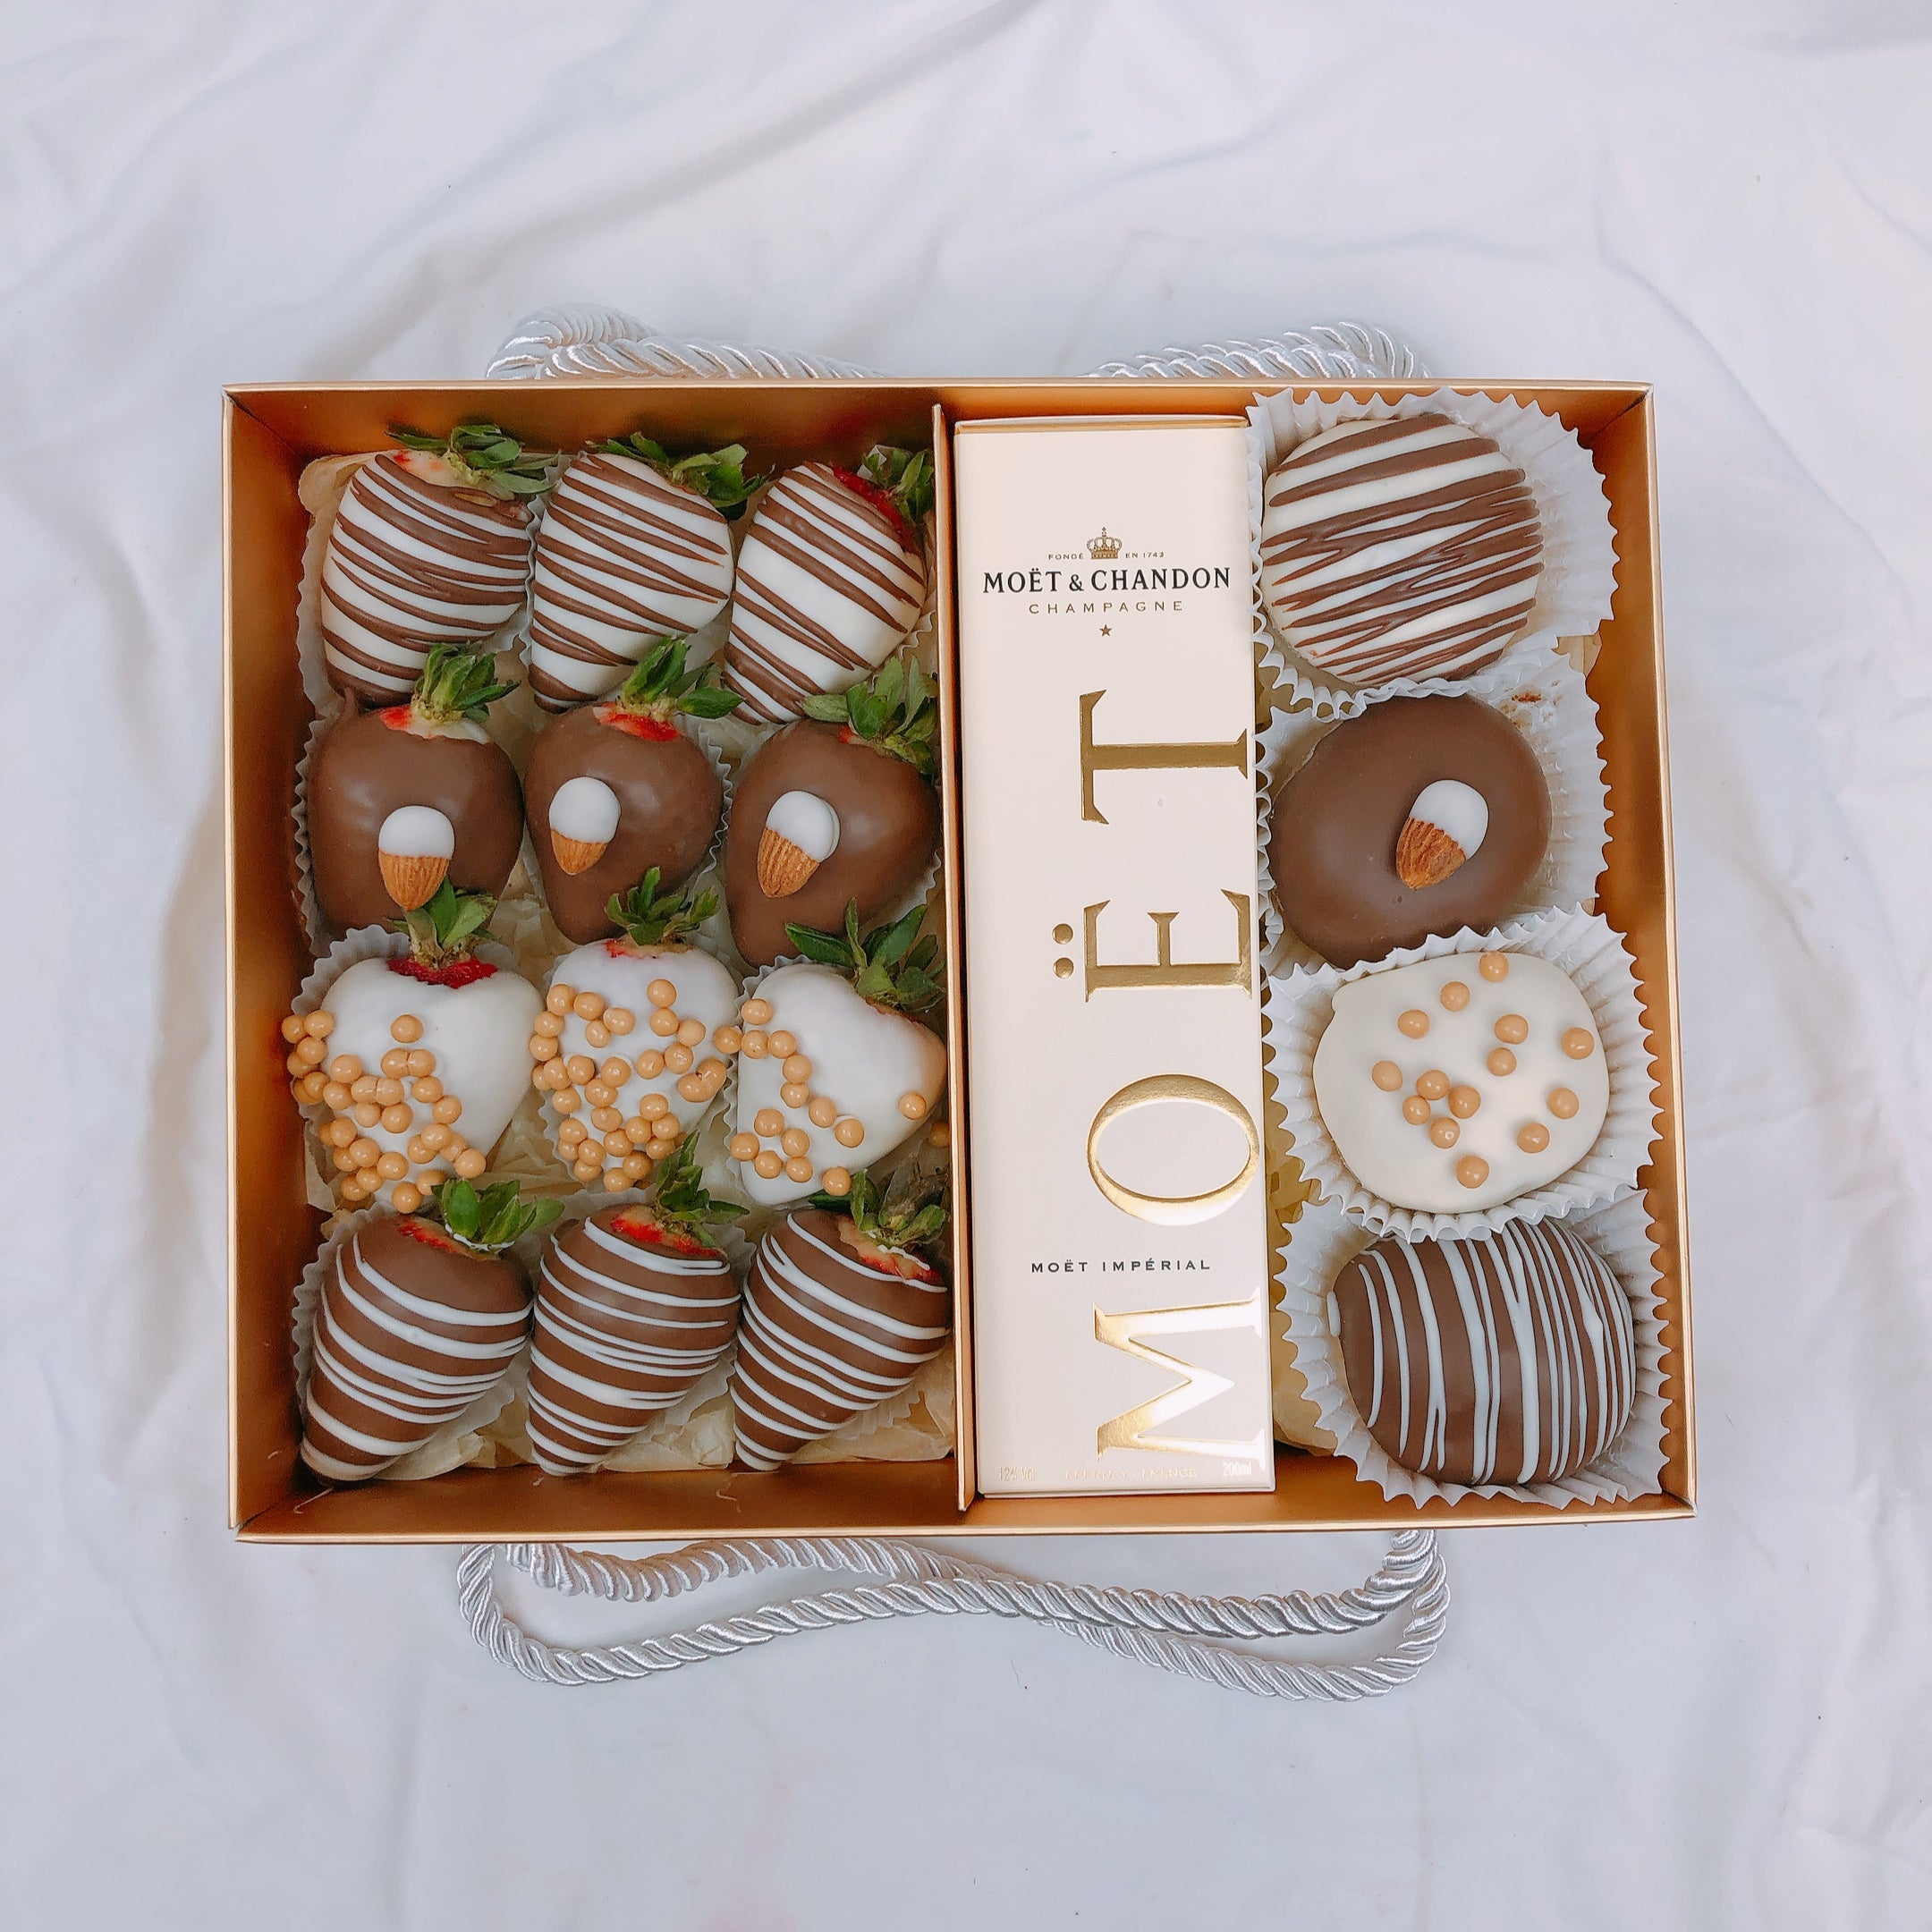 Moet Champaign gift hamper was hand selected Chocolate covered Strawberry & Donut Gift Hamper